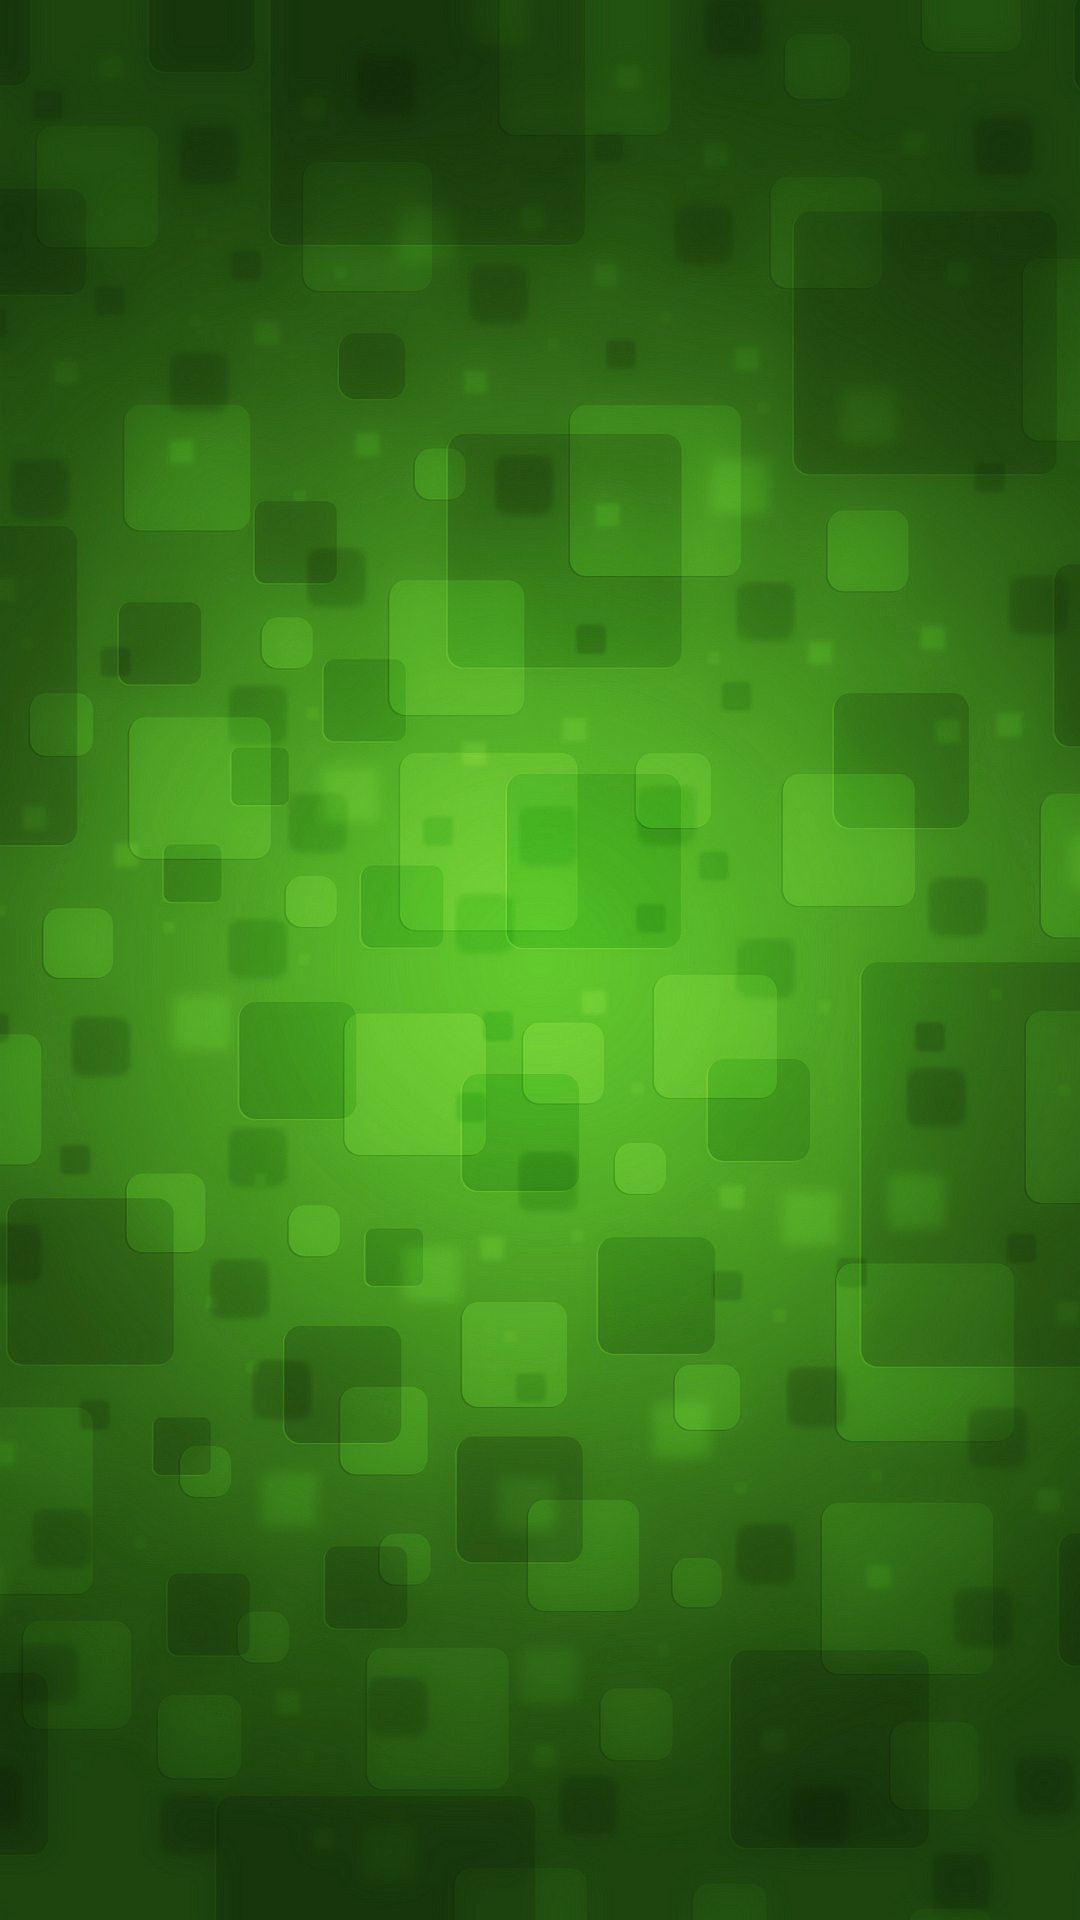 Z Wallpaper Full HD X Smartphone Green Abstract Php